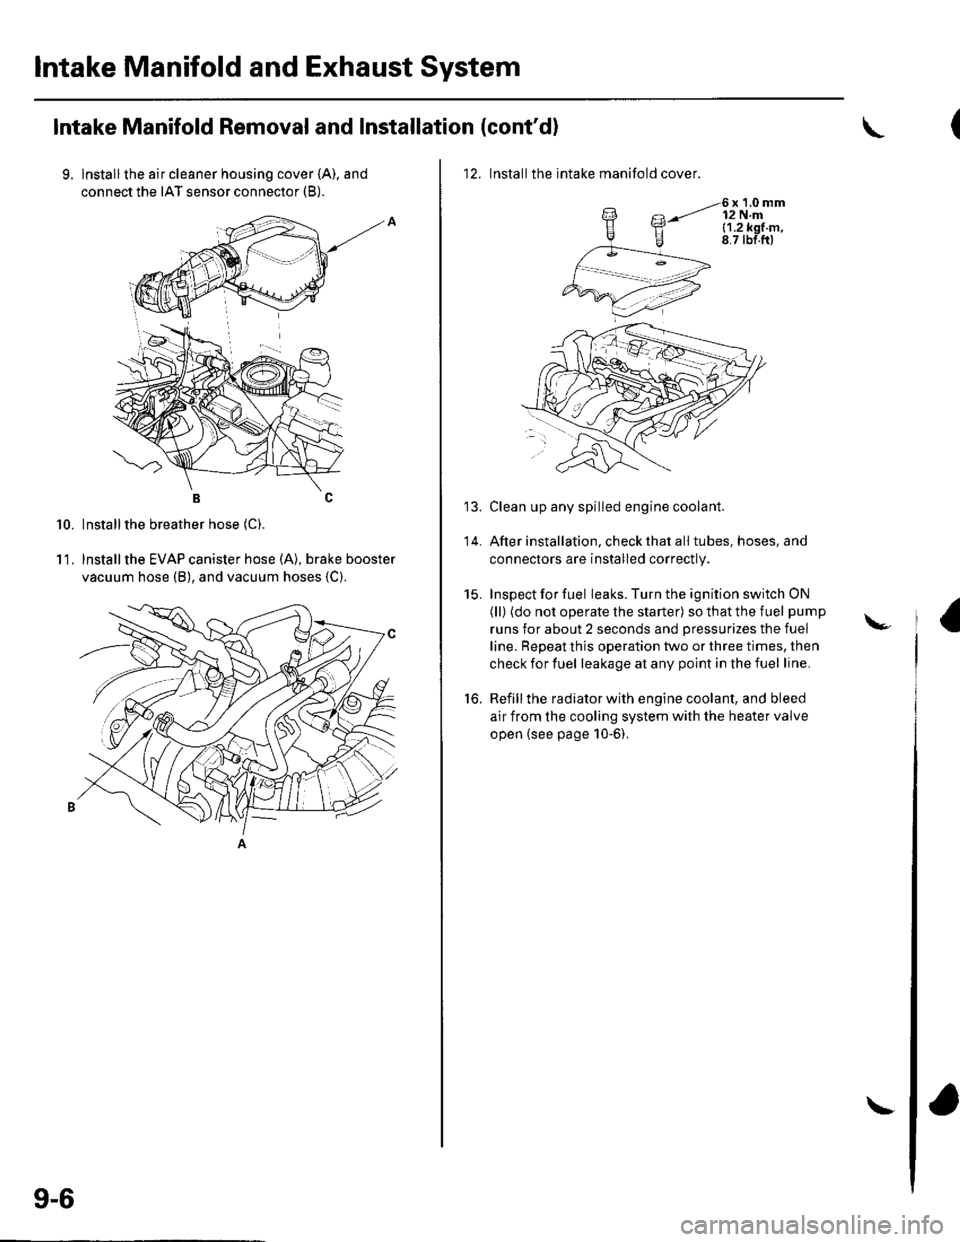 HONDA CIVIC 2003 7.G Workshop Manual lntake Manifold and Exhaust System
Intake Manifold Removal and Installation (contd)
9. lnstallthe air cleaner housing cover (A), and
connect the IAT sensor connector (B).
BC
Installthe breather hose 